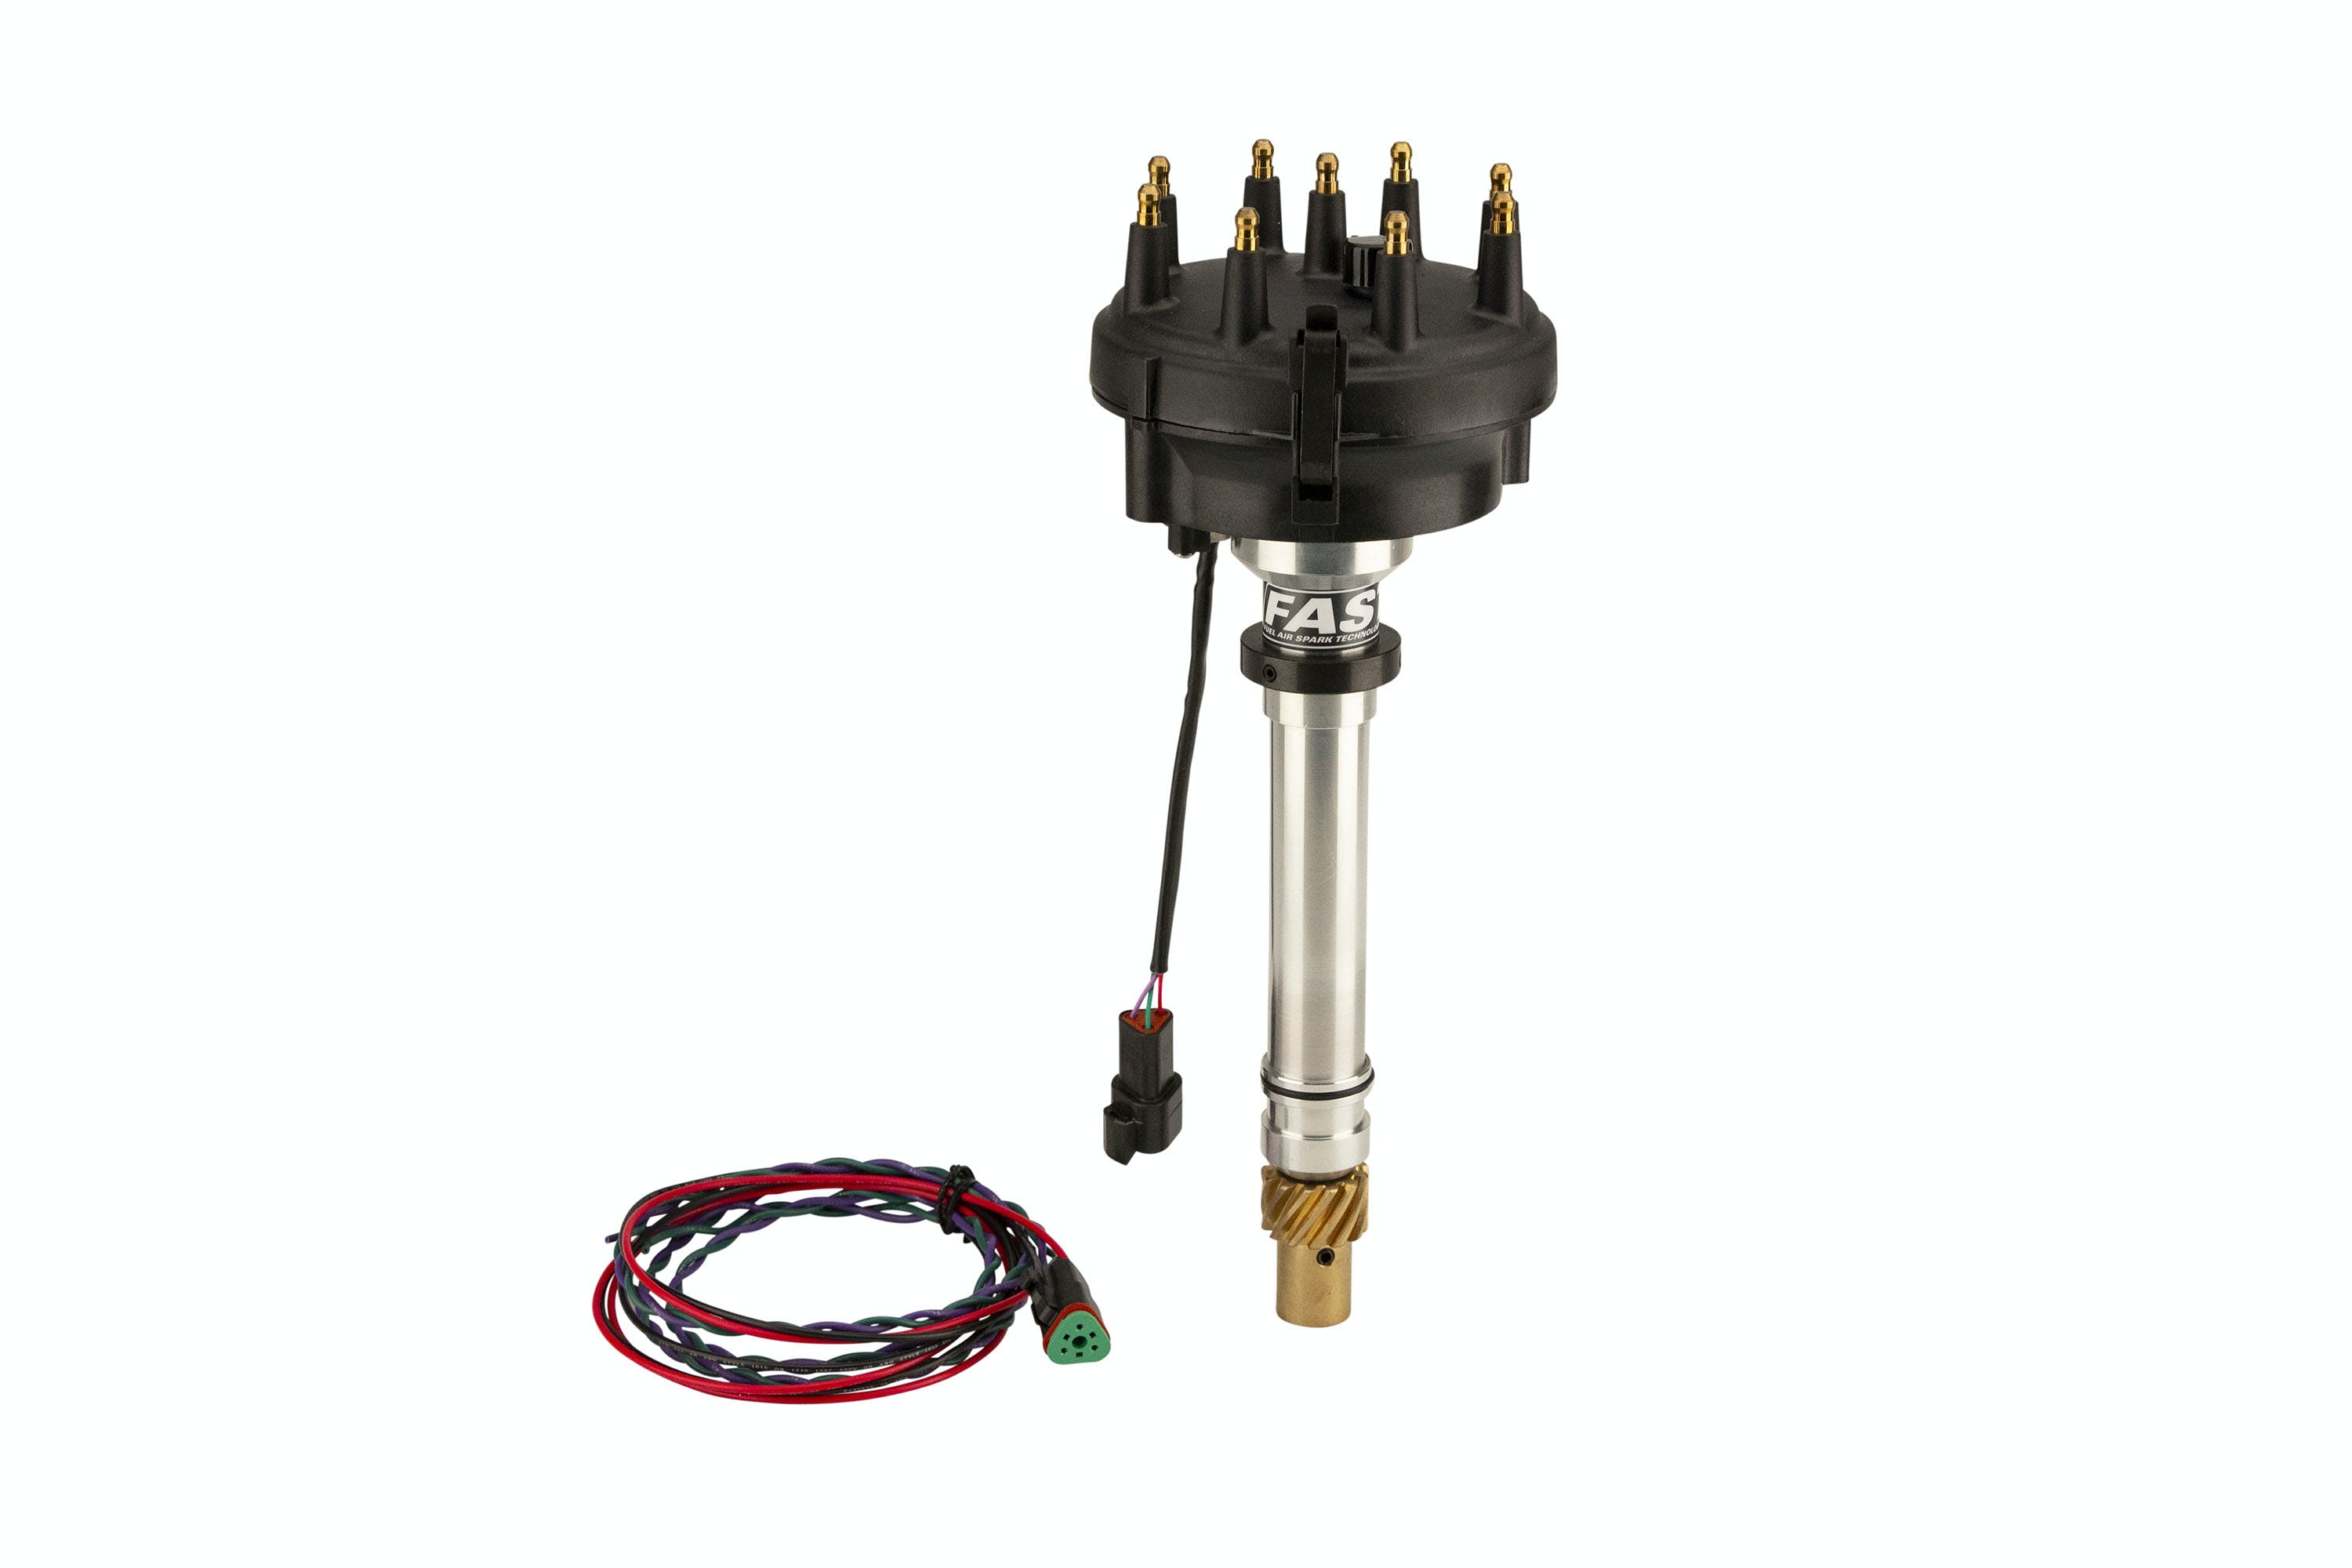 FAST - Fuel Air Spark Technology 1000-1510EFI XDi Race EFI Distributor for Chevrolet Small Block and Big Block w/ LargeCap